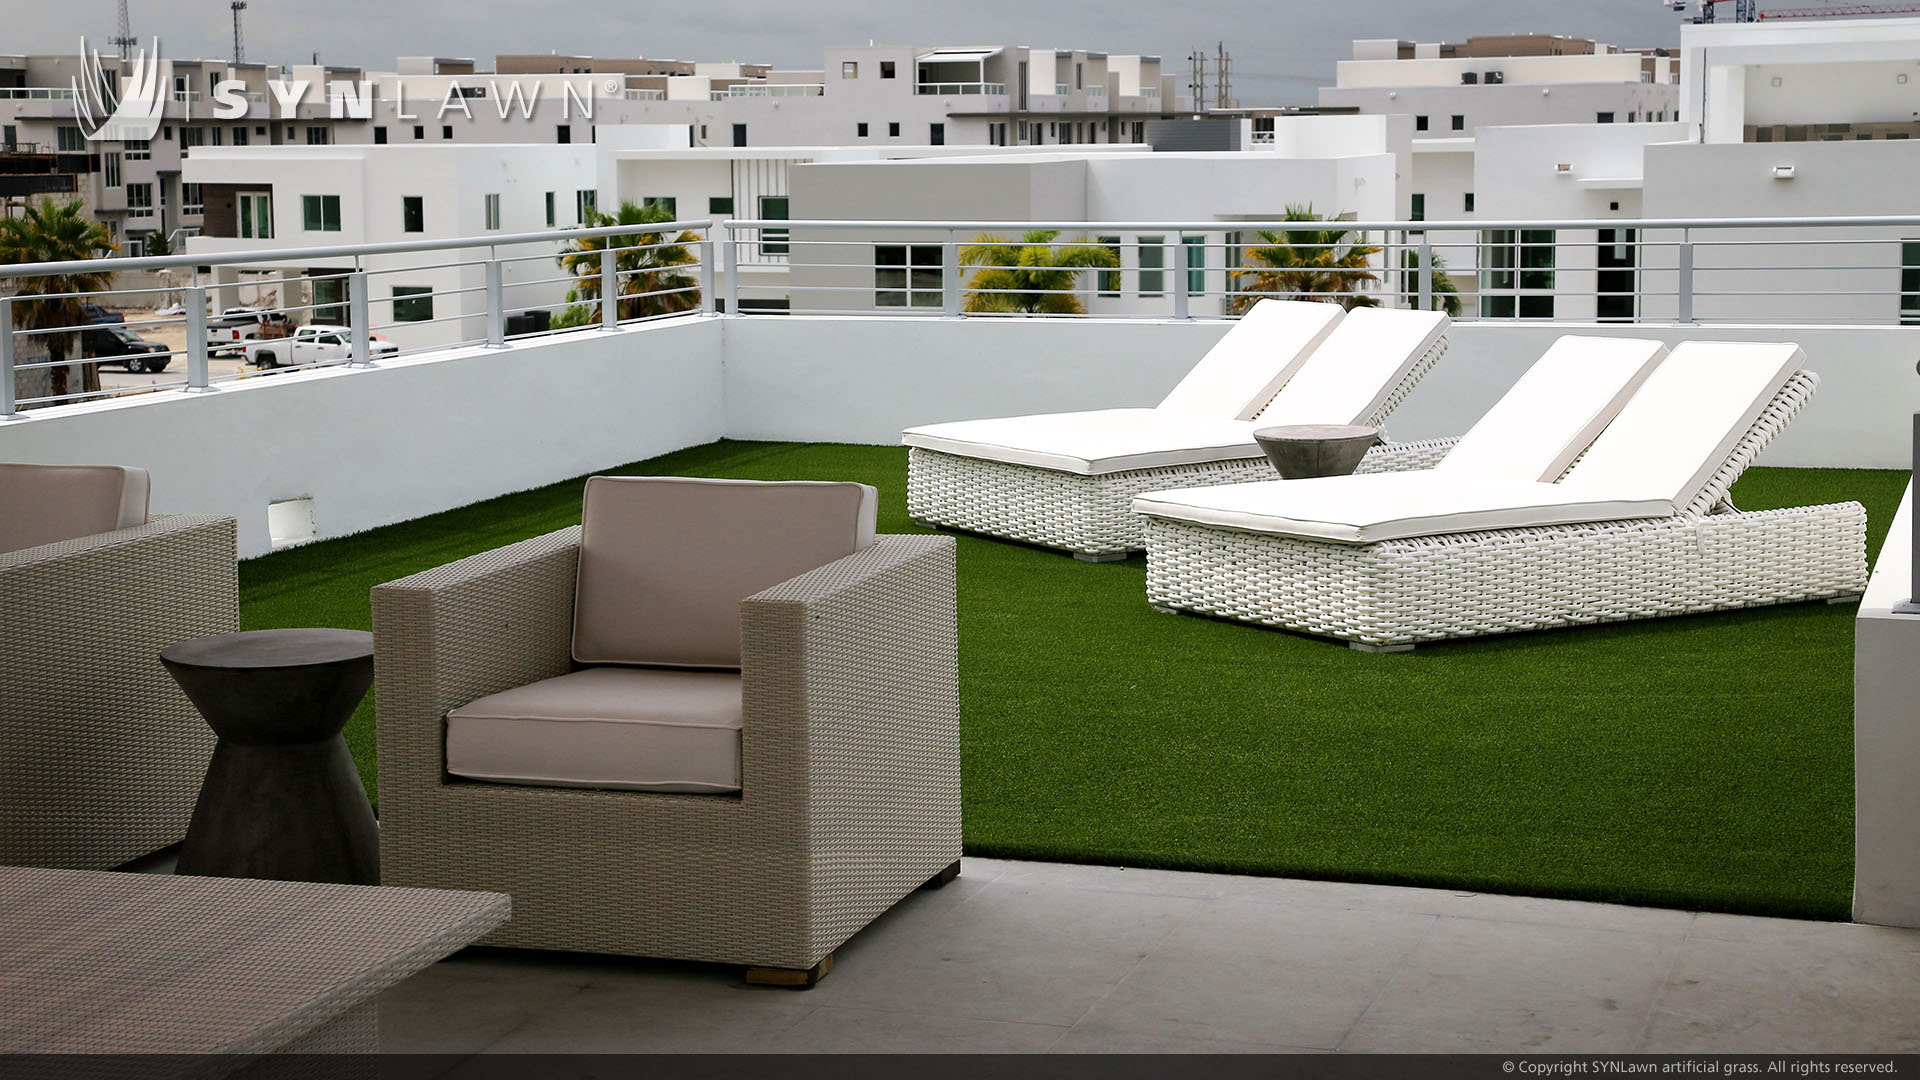 Artificial grass rooftop installed by SYNLawn